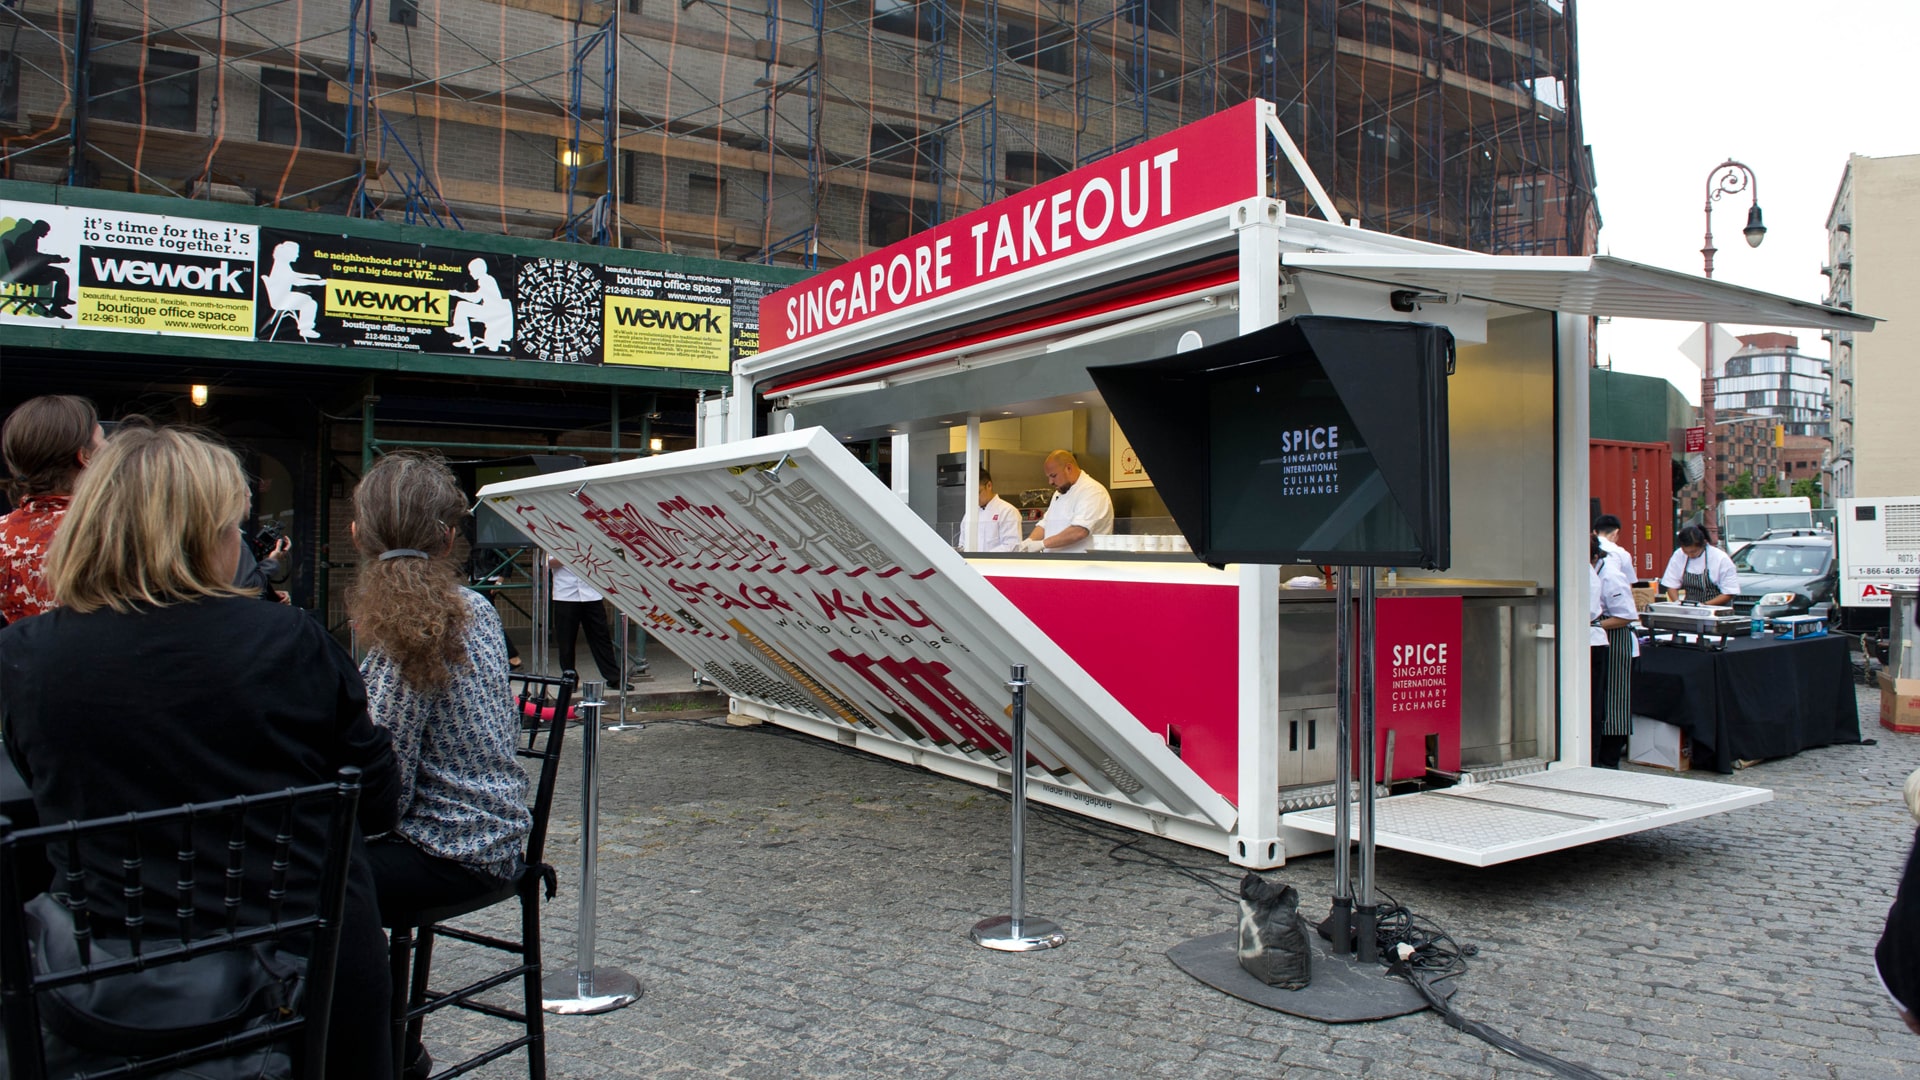 tsc_opt-images_customized-containers_singapore-takeout-new-york-1920x1080-03-min